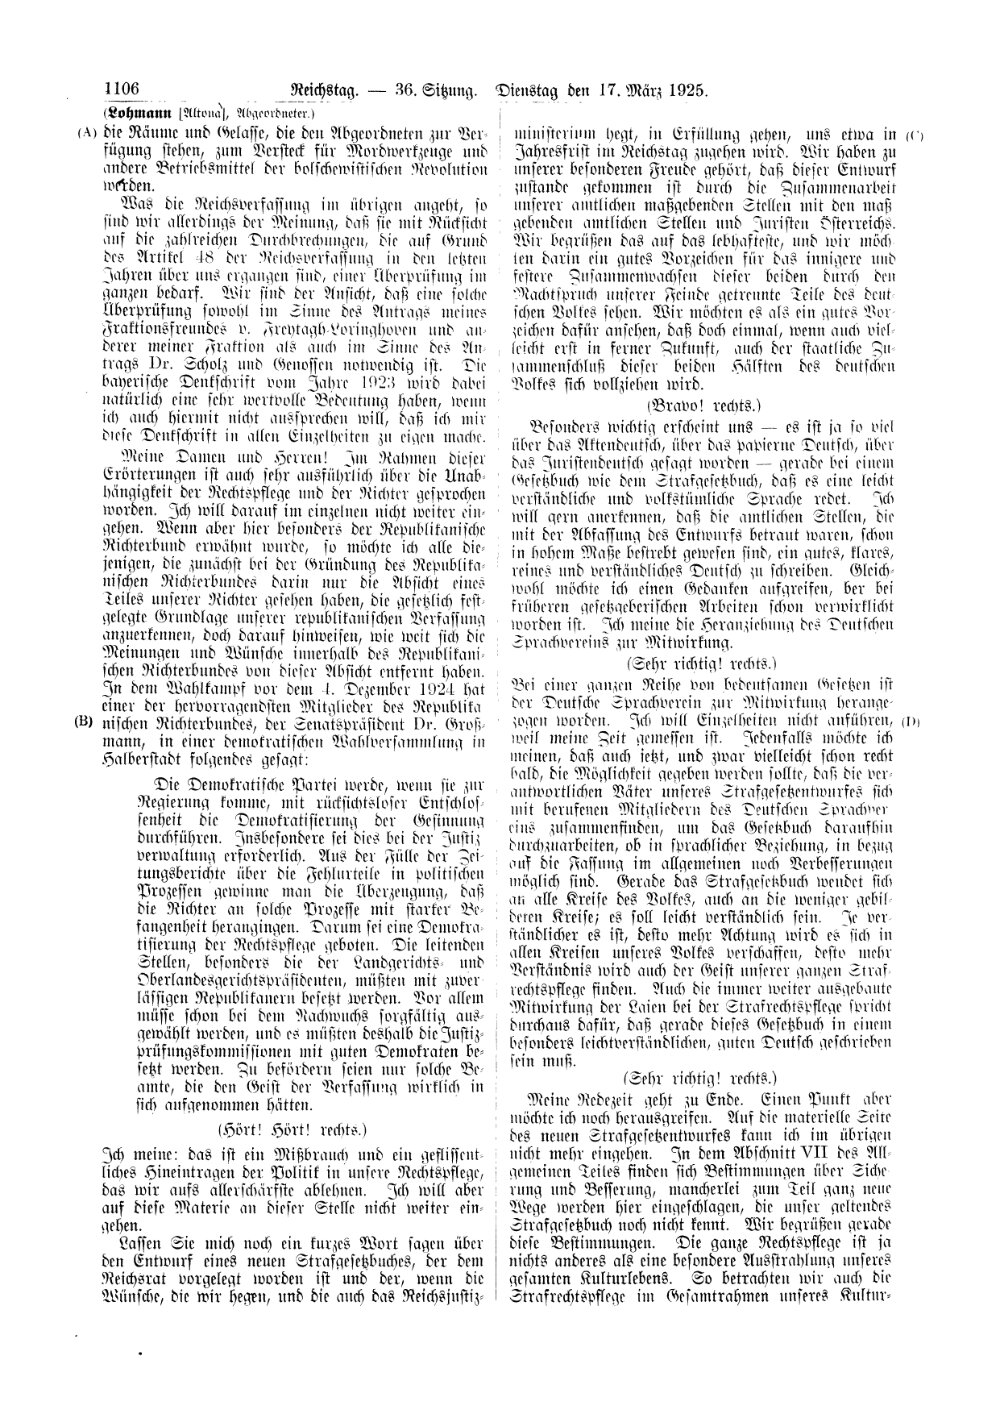 Scan of page 1106